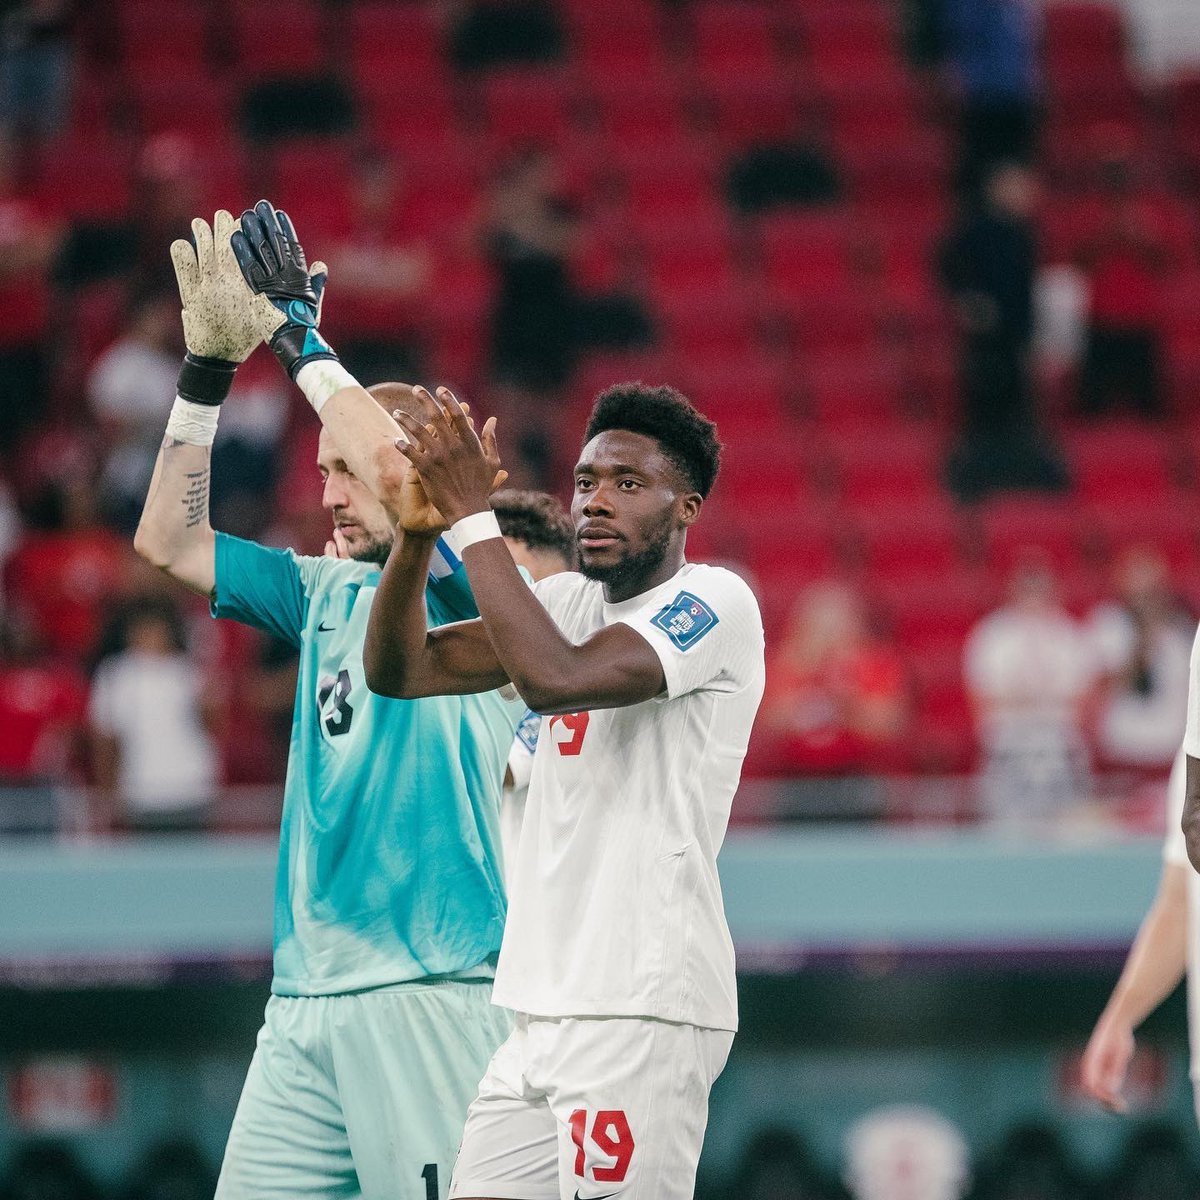 A disappointing result against a top team in the World Cup. we got two more games to go, we go again on Sunday! 

Thank you to all the fans for their support!🙏🏾